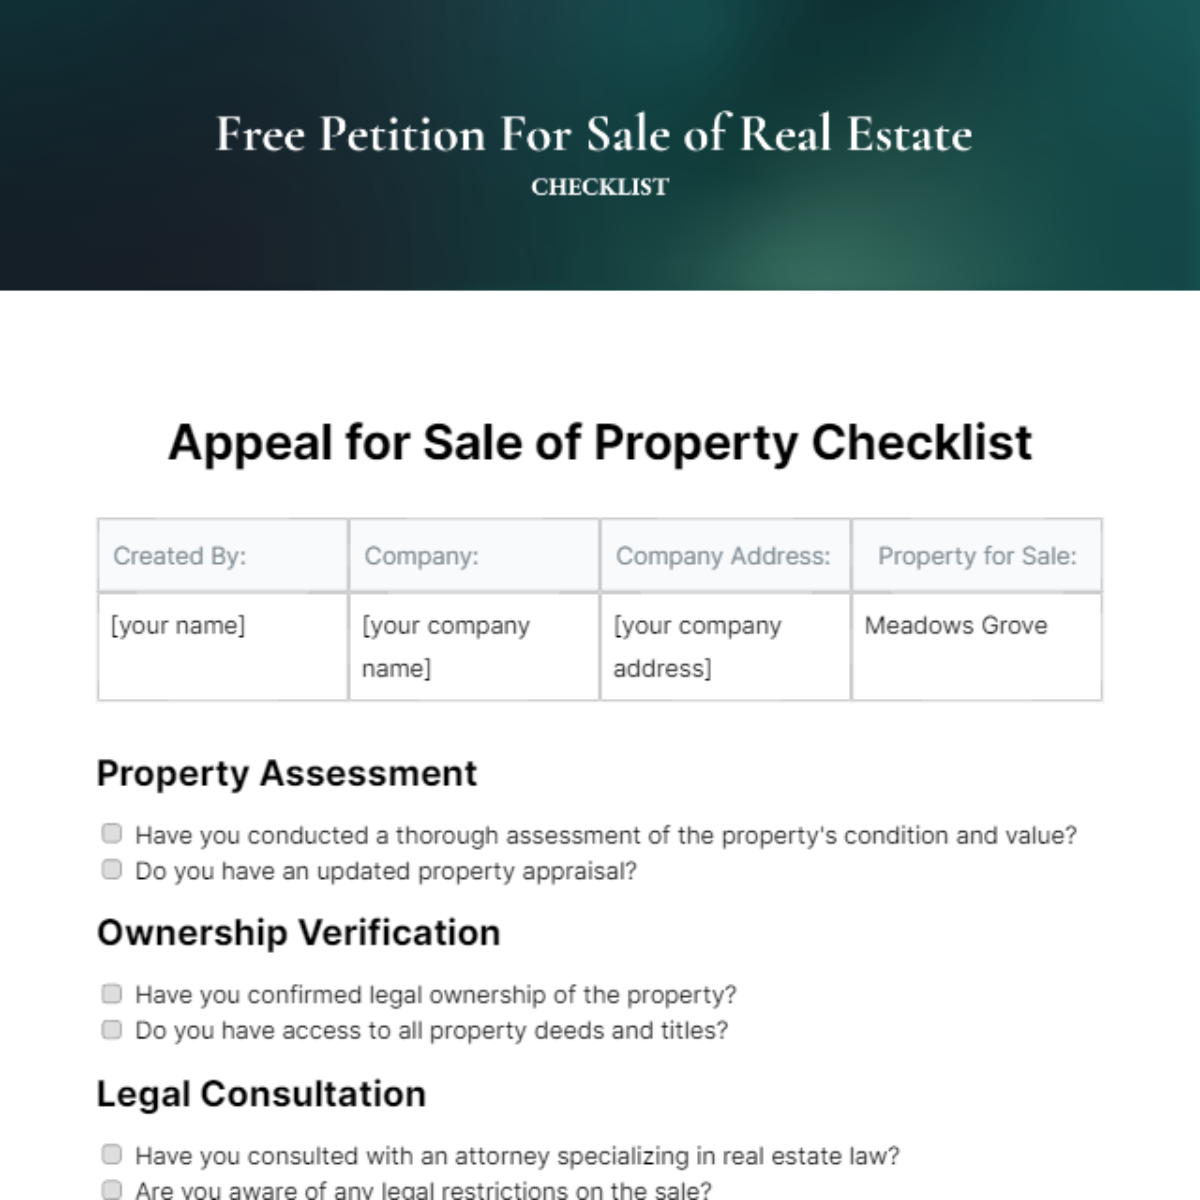 Petition For Sale of Real Estate Checklist Template